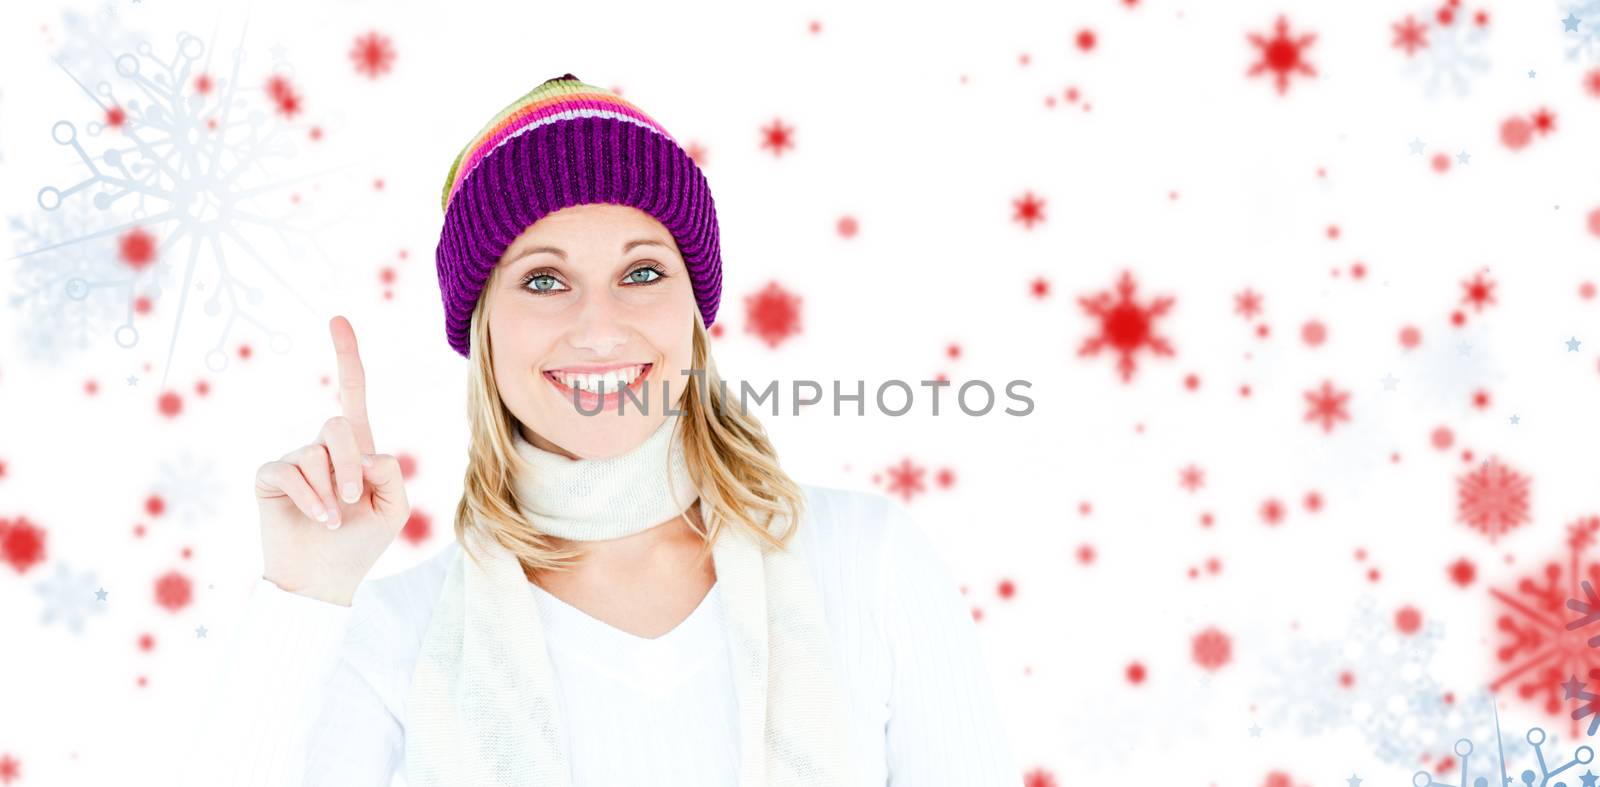 Composite image of joyful woman with a colorful hat pointing upwards by Wavebreakmedia